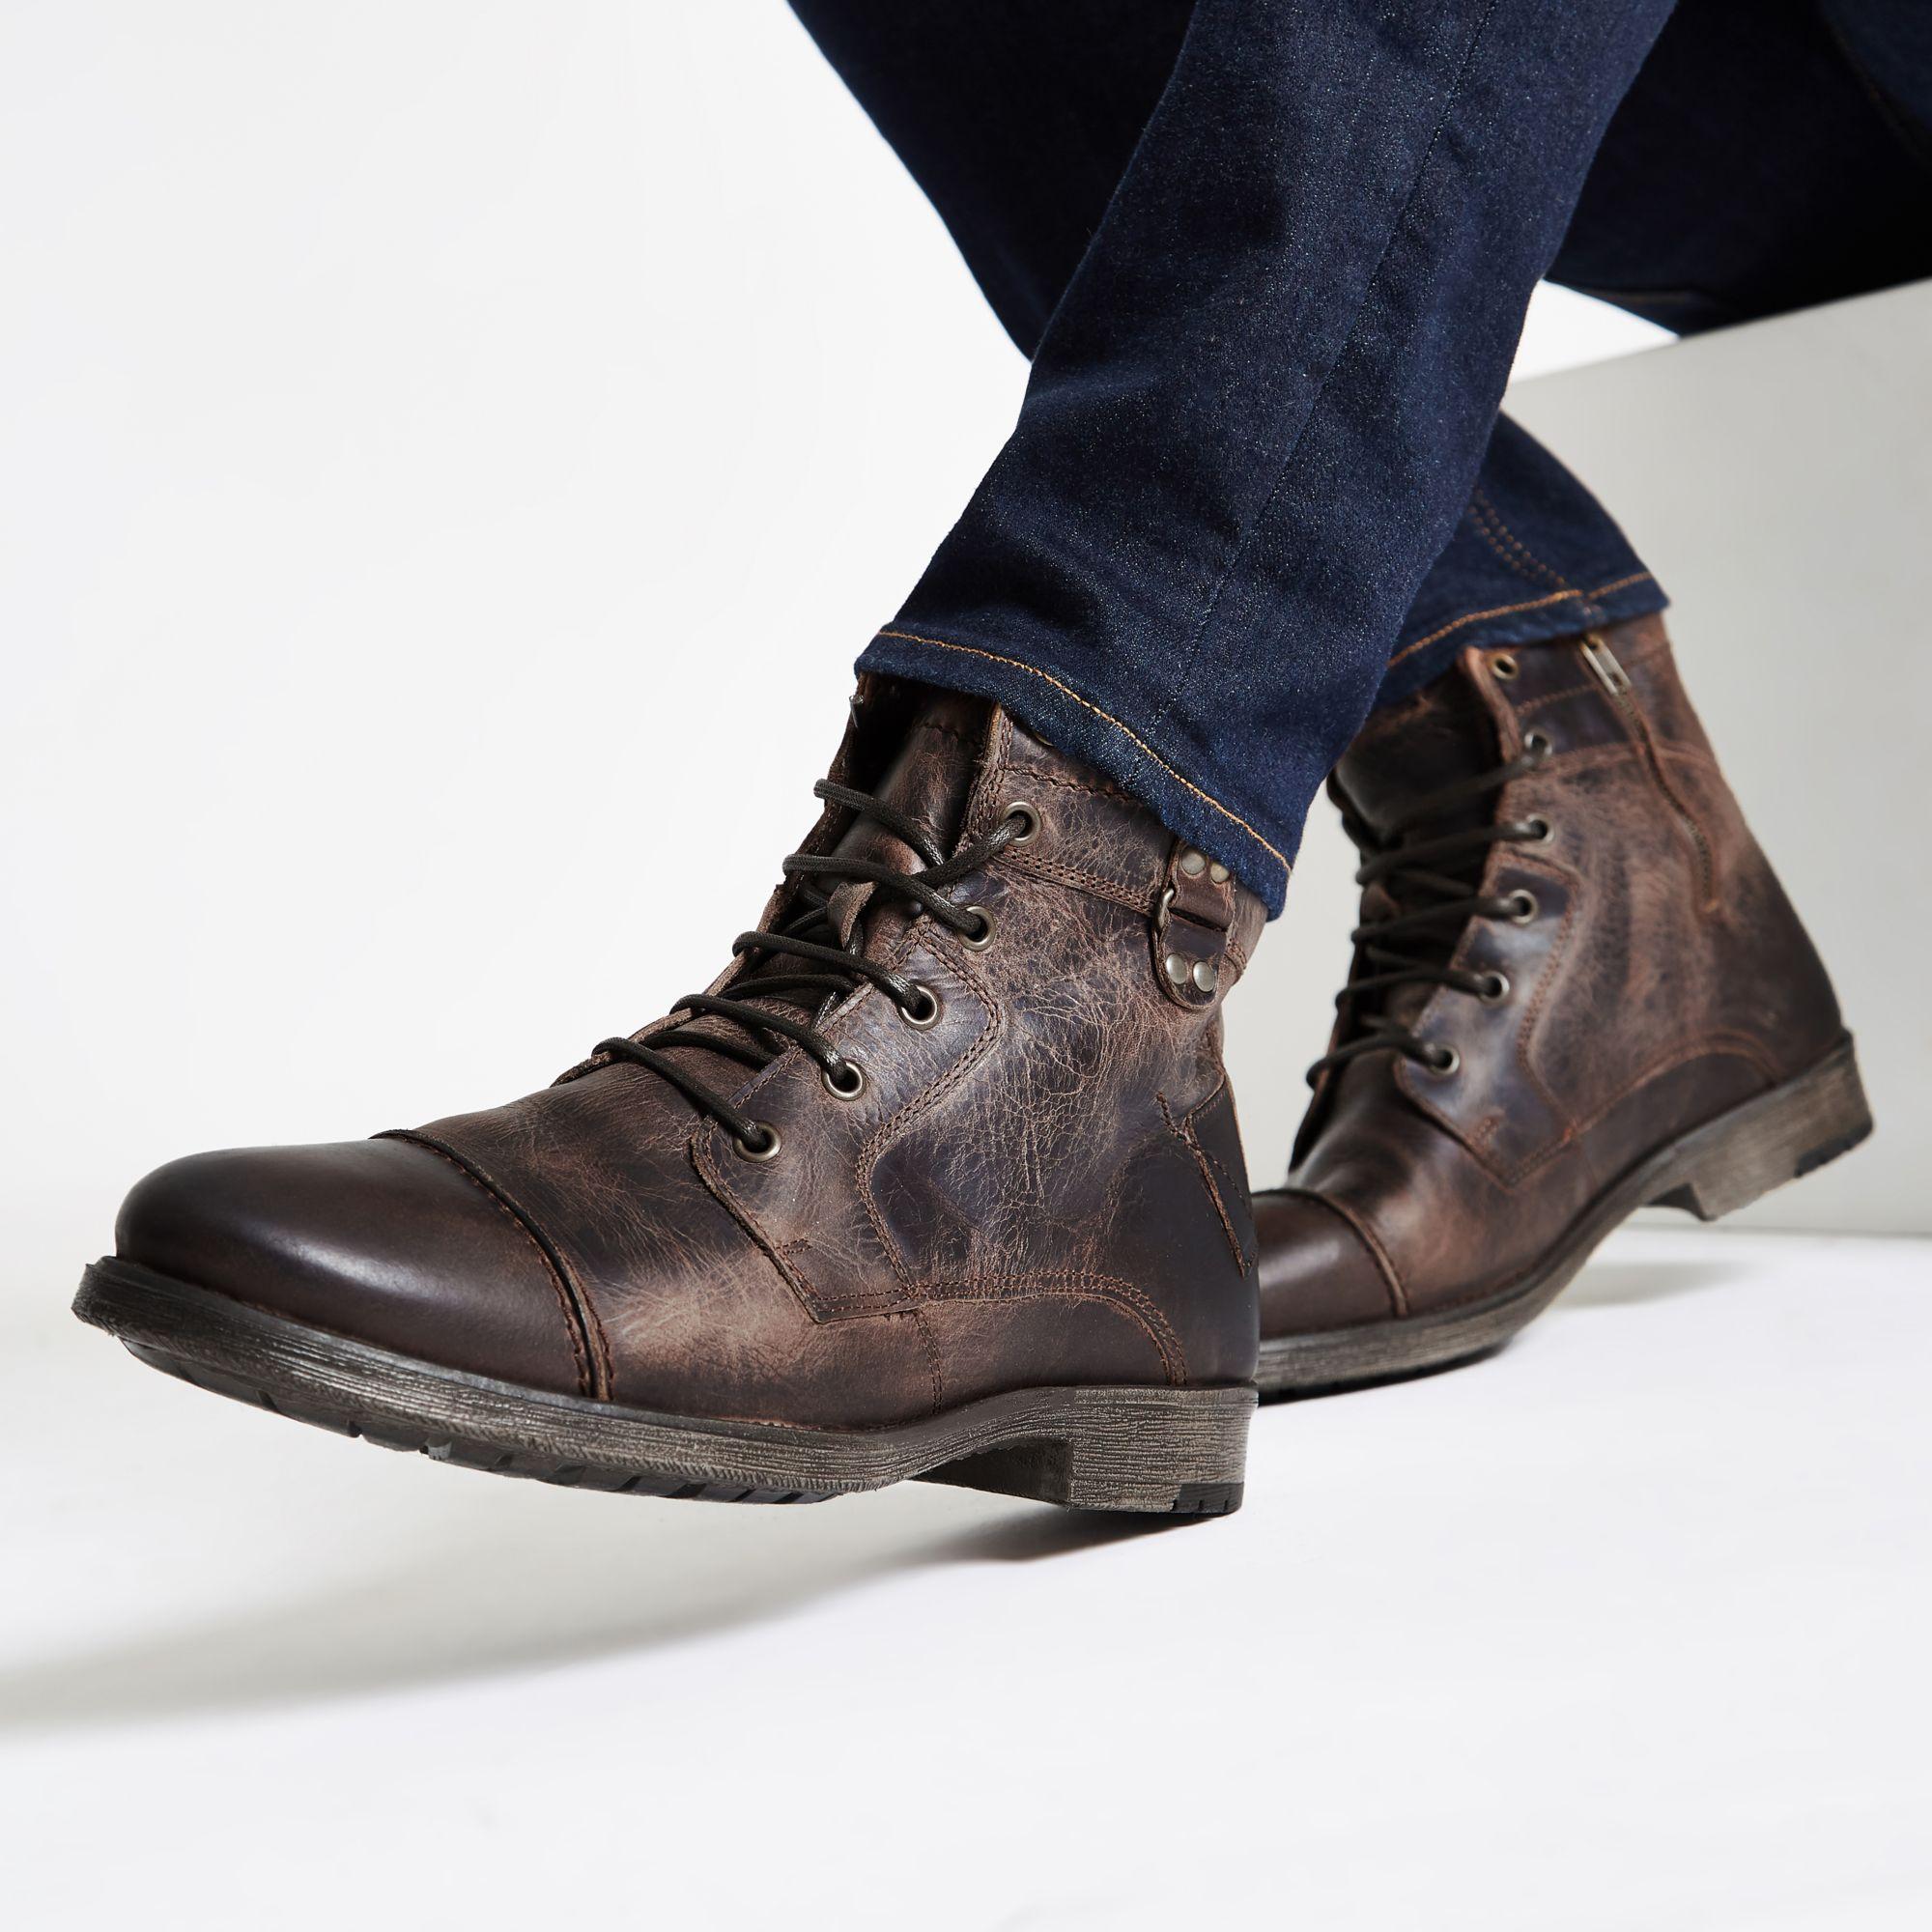 River Island Dark Brown Leather Lace-up Military Boots for Men | Lyst